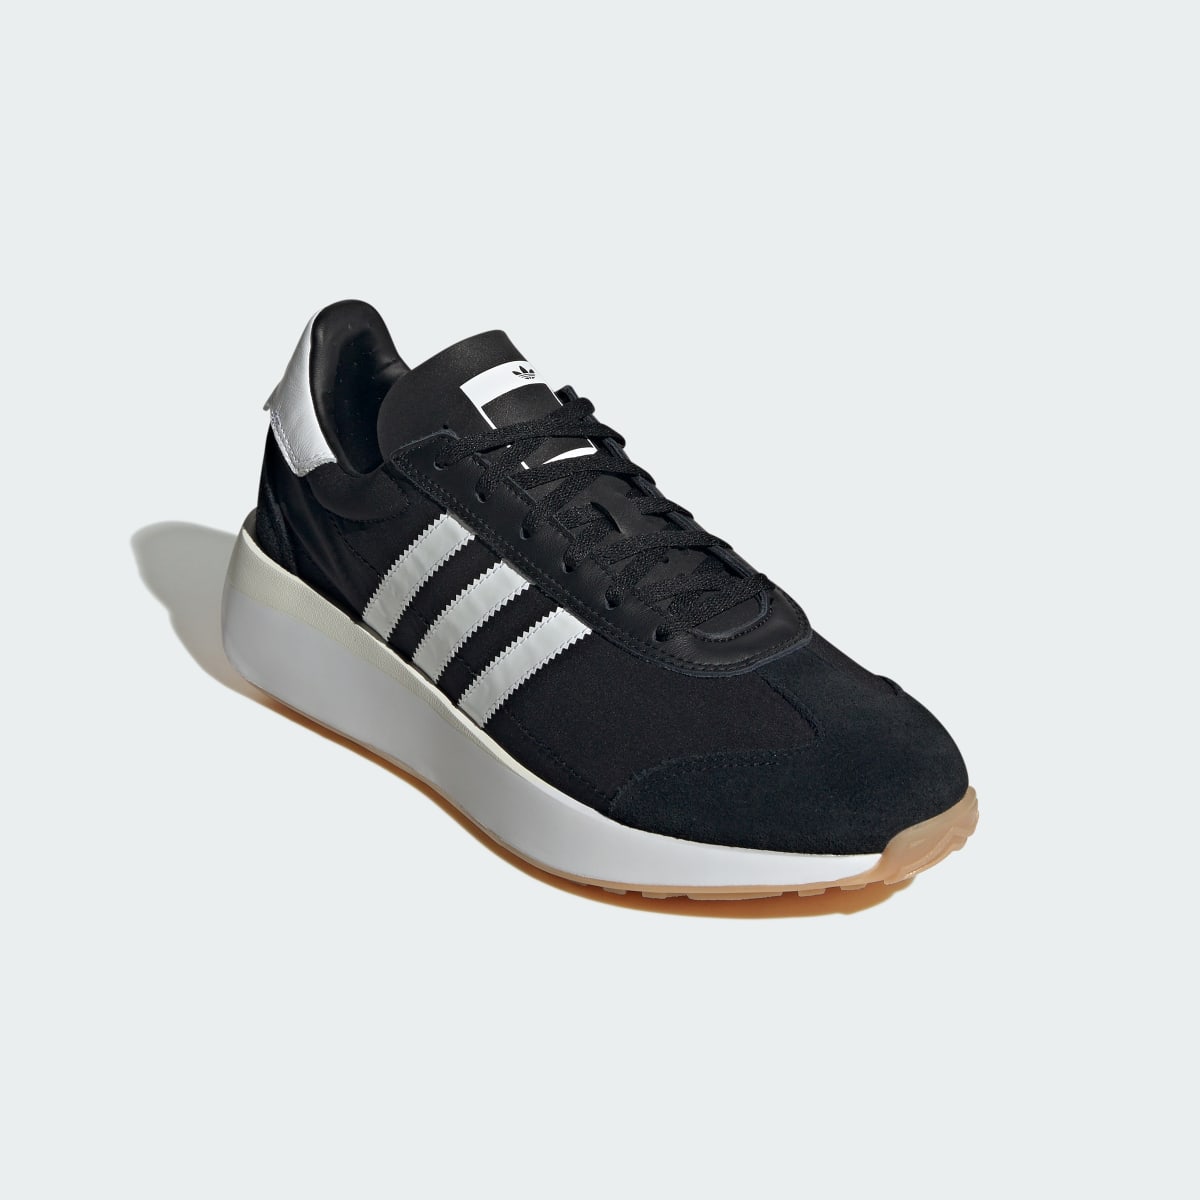 Adidas Country XLG Shoes. 4